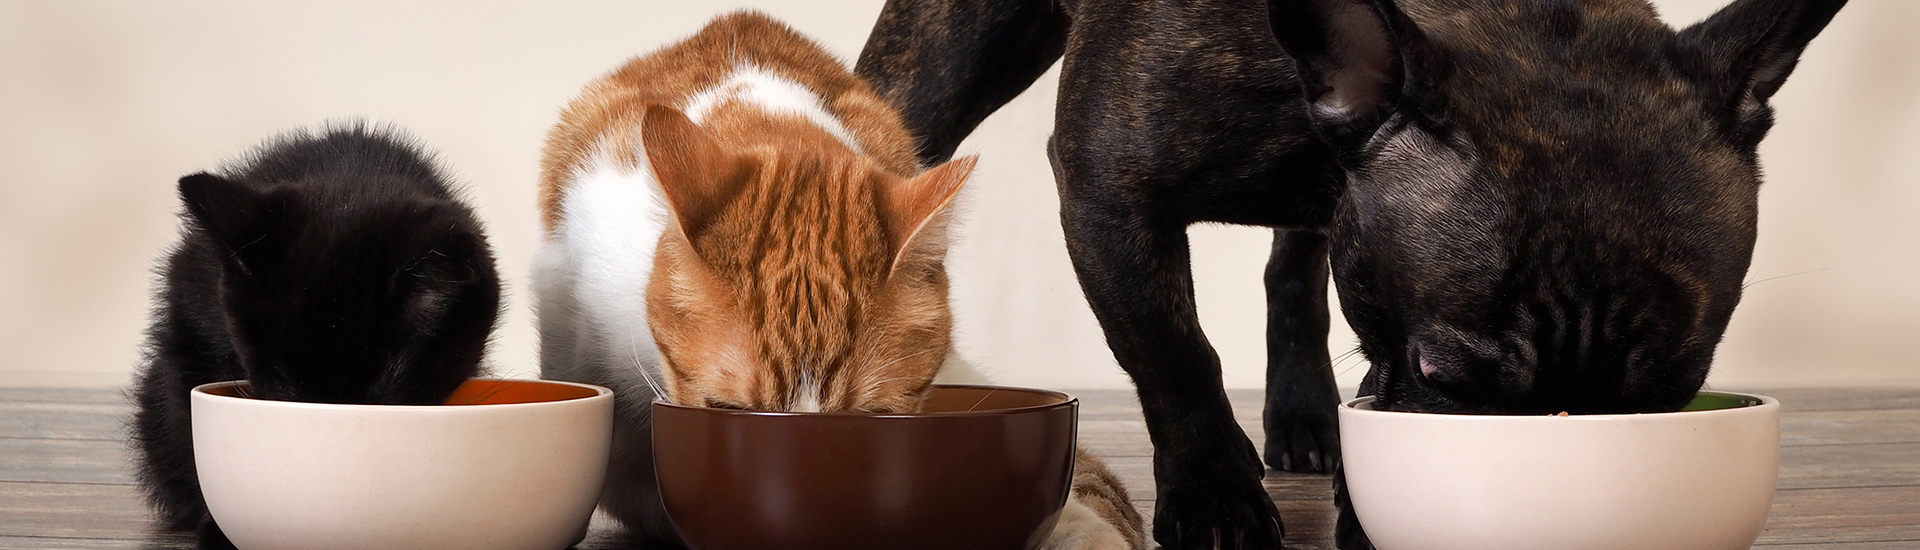 kitten, cat, and dog eating out of bowls